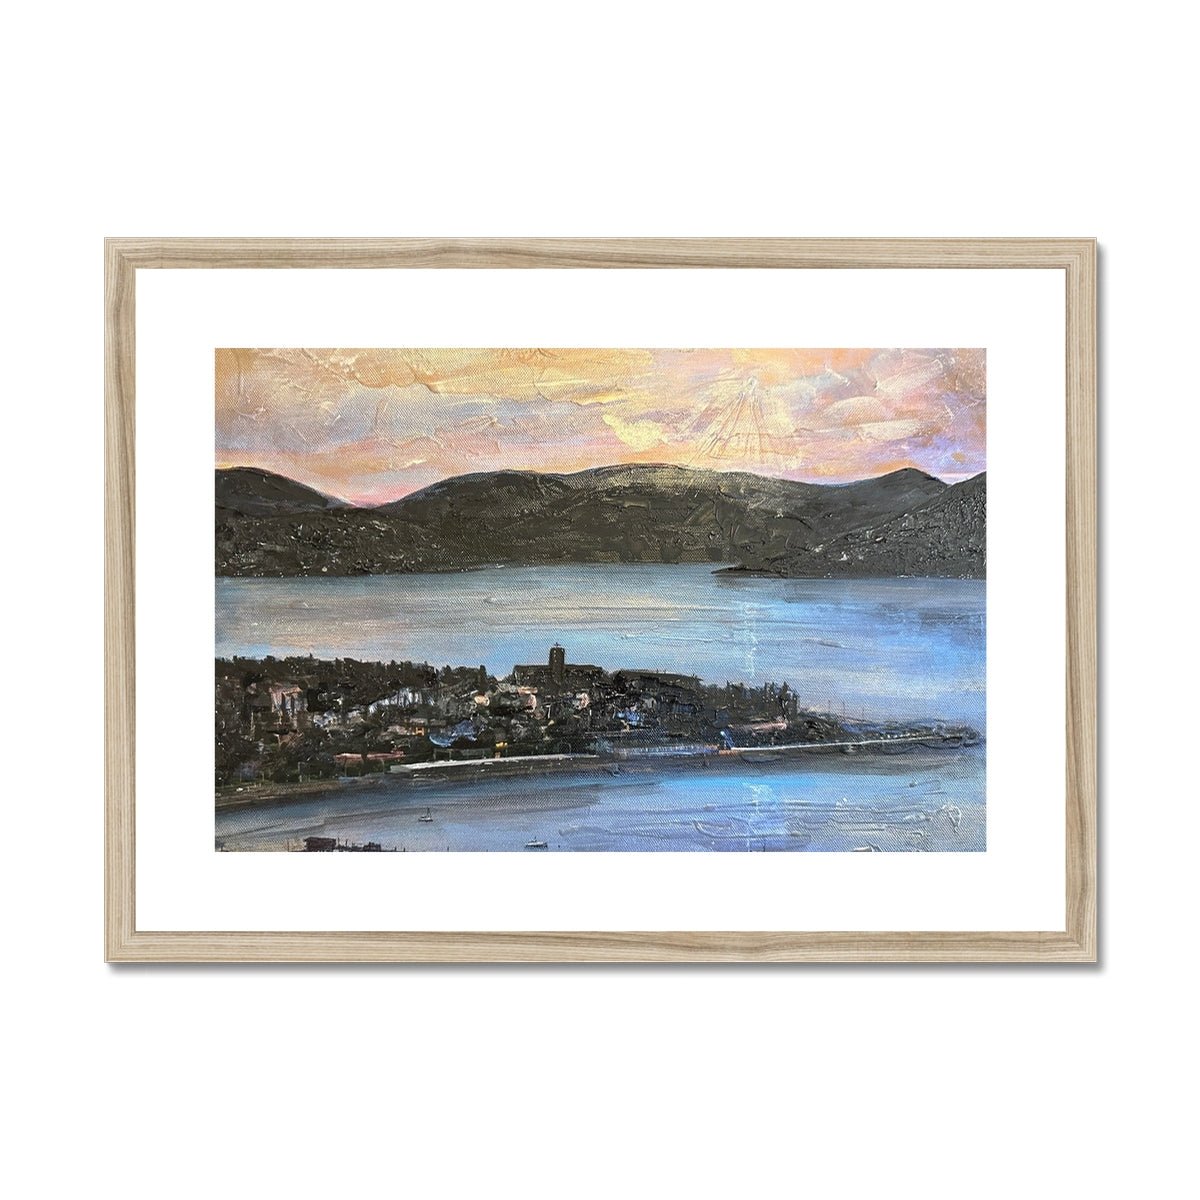 From Lyle Hill Painting | Framed & Mounted Prints From Scotland-Framed & Mounted Prints-River Clyde Art Gallery-A2 Landscape-Natural Frame-Paintings, Prints, Homeware, Art Gifts From Scotland By Scottish Artist Kevin Hunter